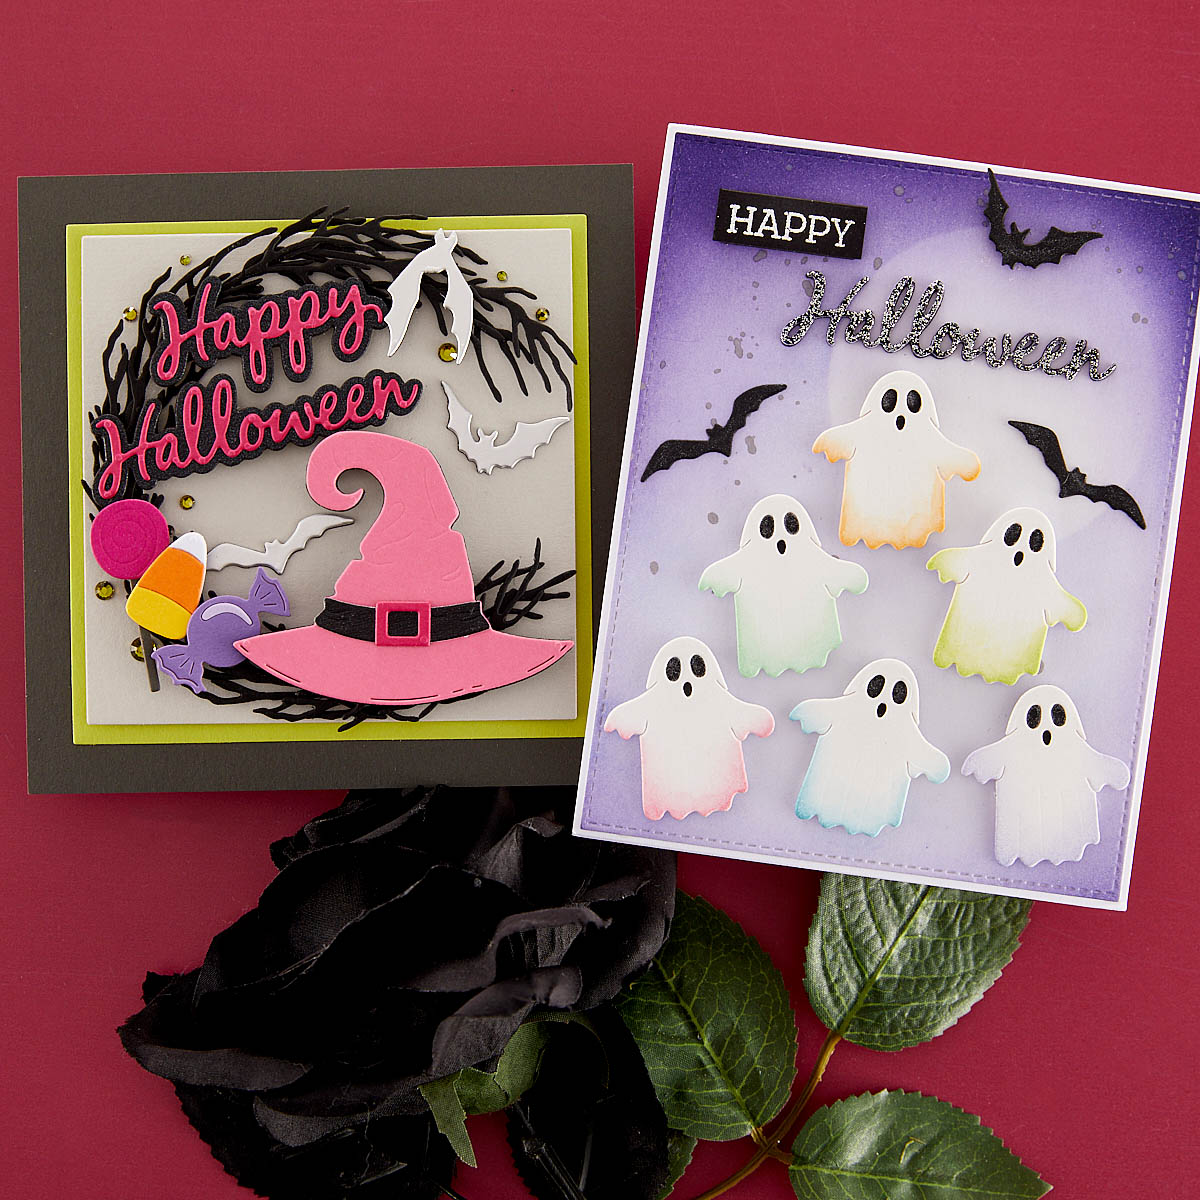 Spellbindershalloween Wreath Add-ons Etched Dies From the Beautiful Wreaths Collection